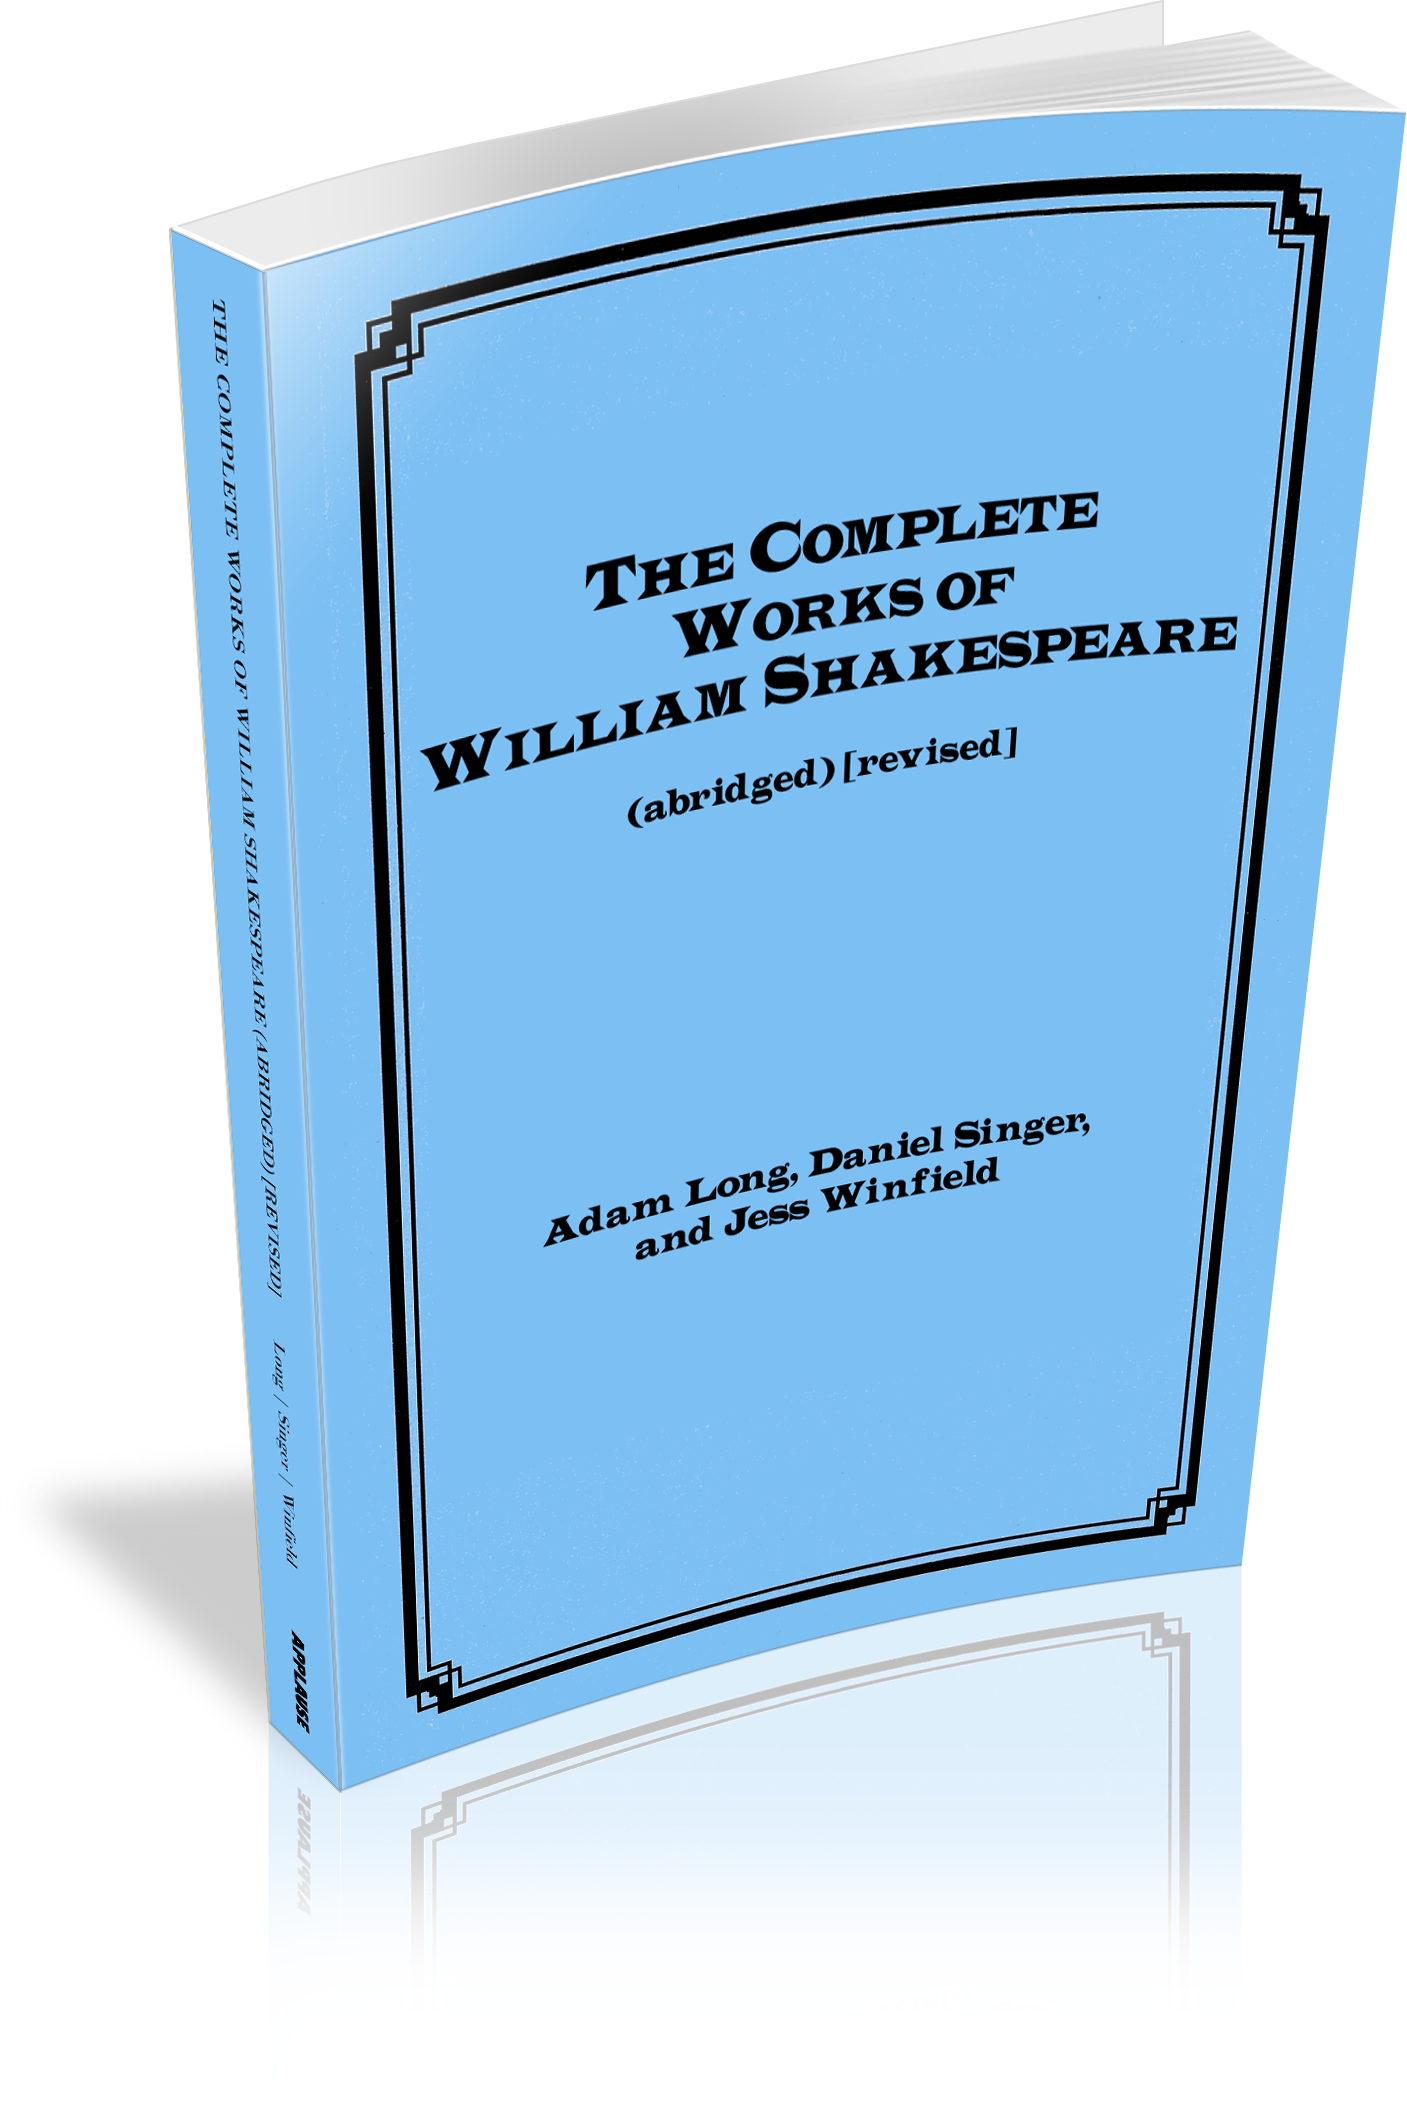 The Complete Works of William Shakespeare (abridged) revised pic